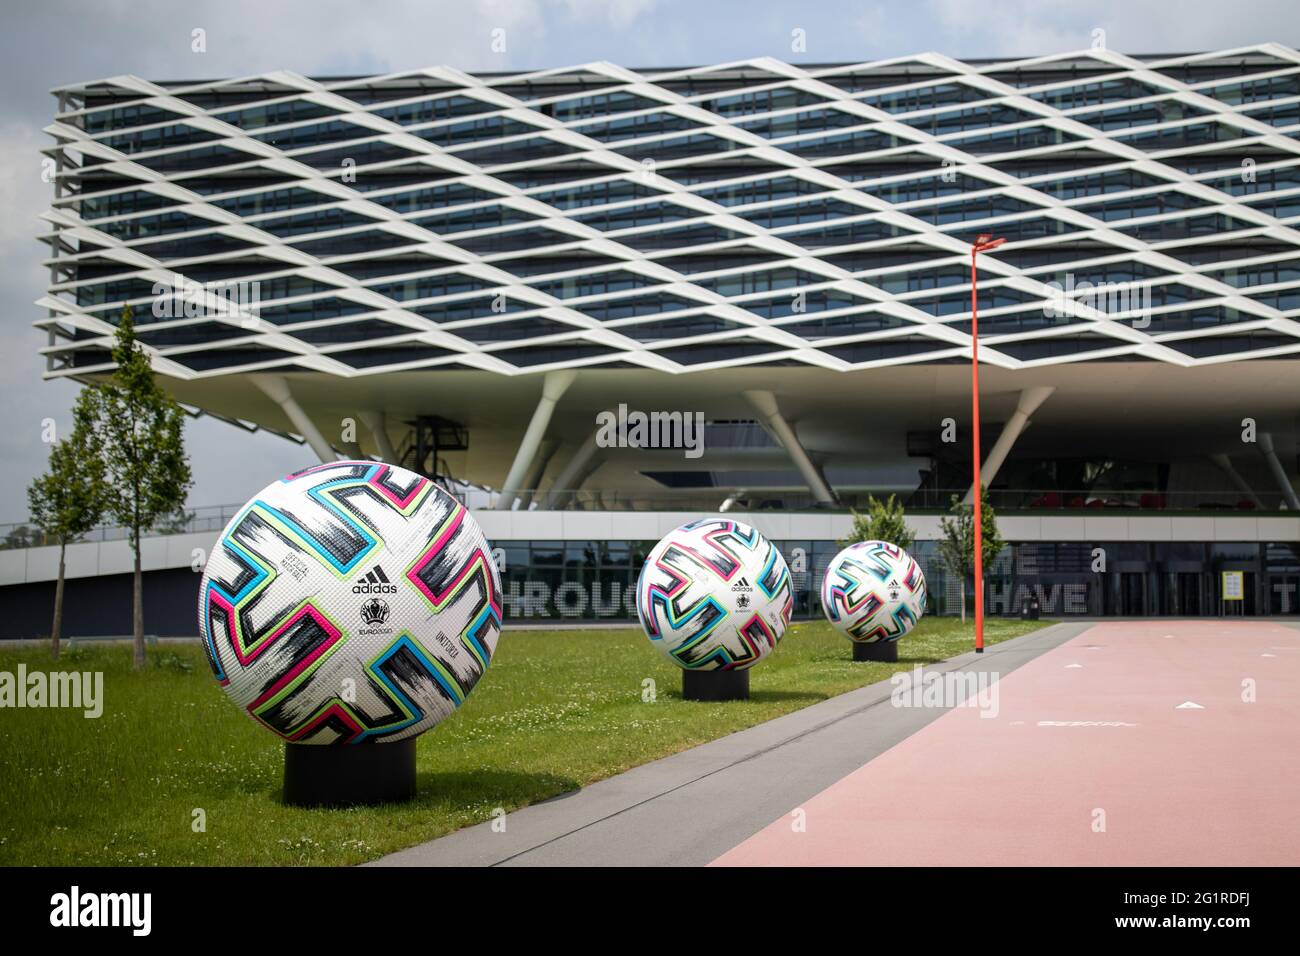 07 June 2021, Bavaria, Herzogenaurach: Oversized official match balls  "Uniforia" of EURO 2020 stand in front of the office building "Arena" on  the premises of the sporting goods manufacturer adidas. The German